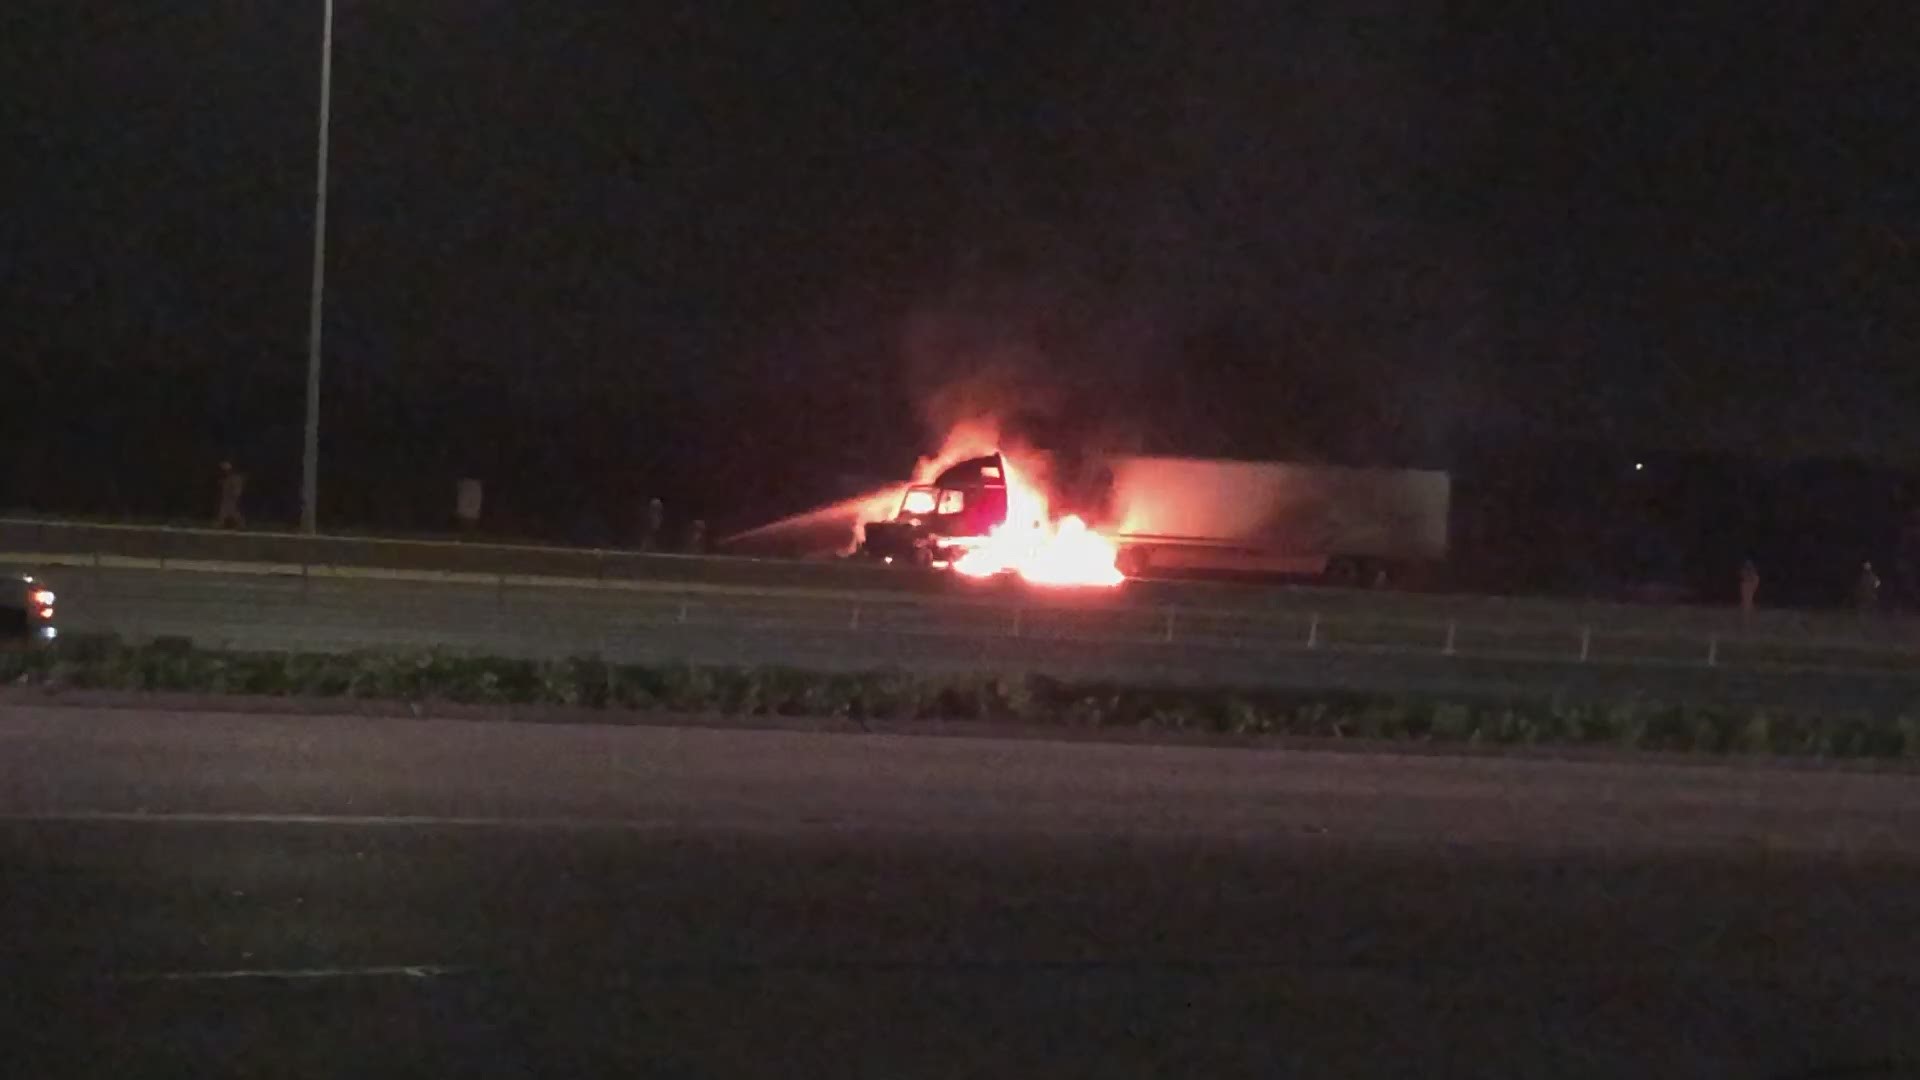 Video courtesy of Cindy Nguyen and Michelle Bui. 18-wheeler engulfed in flames on Mopac Expressway.